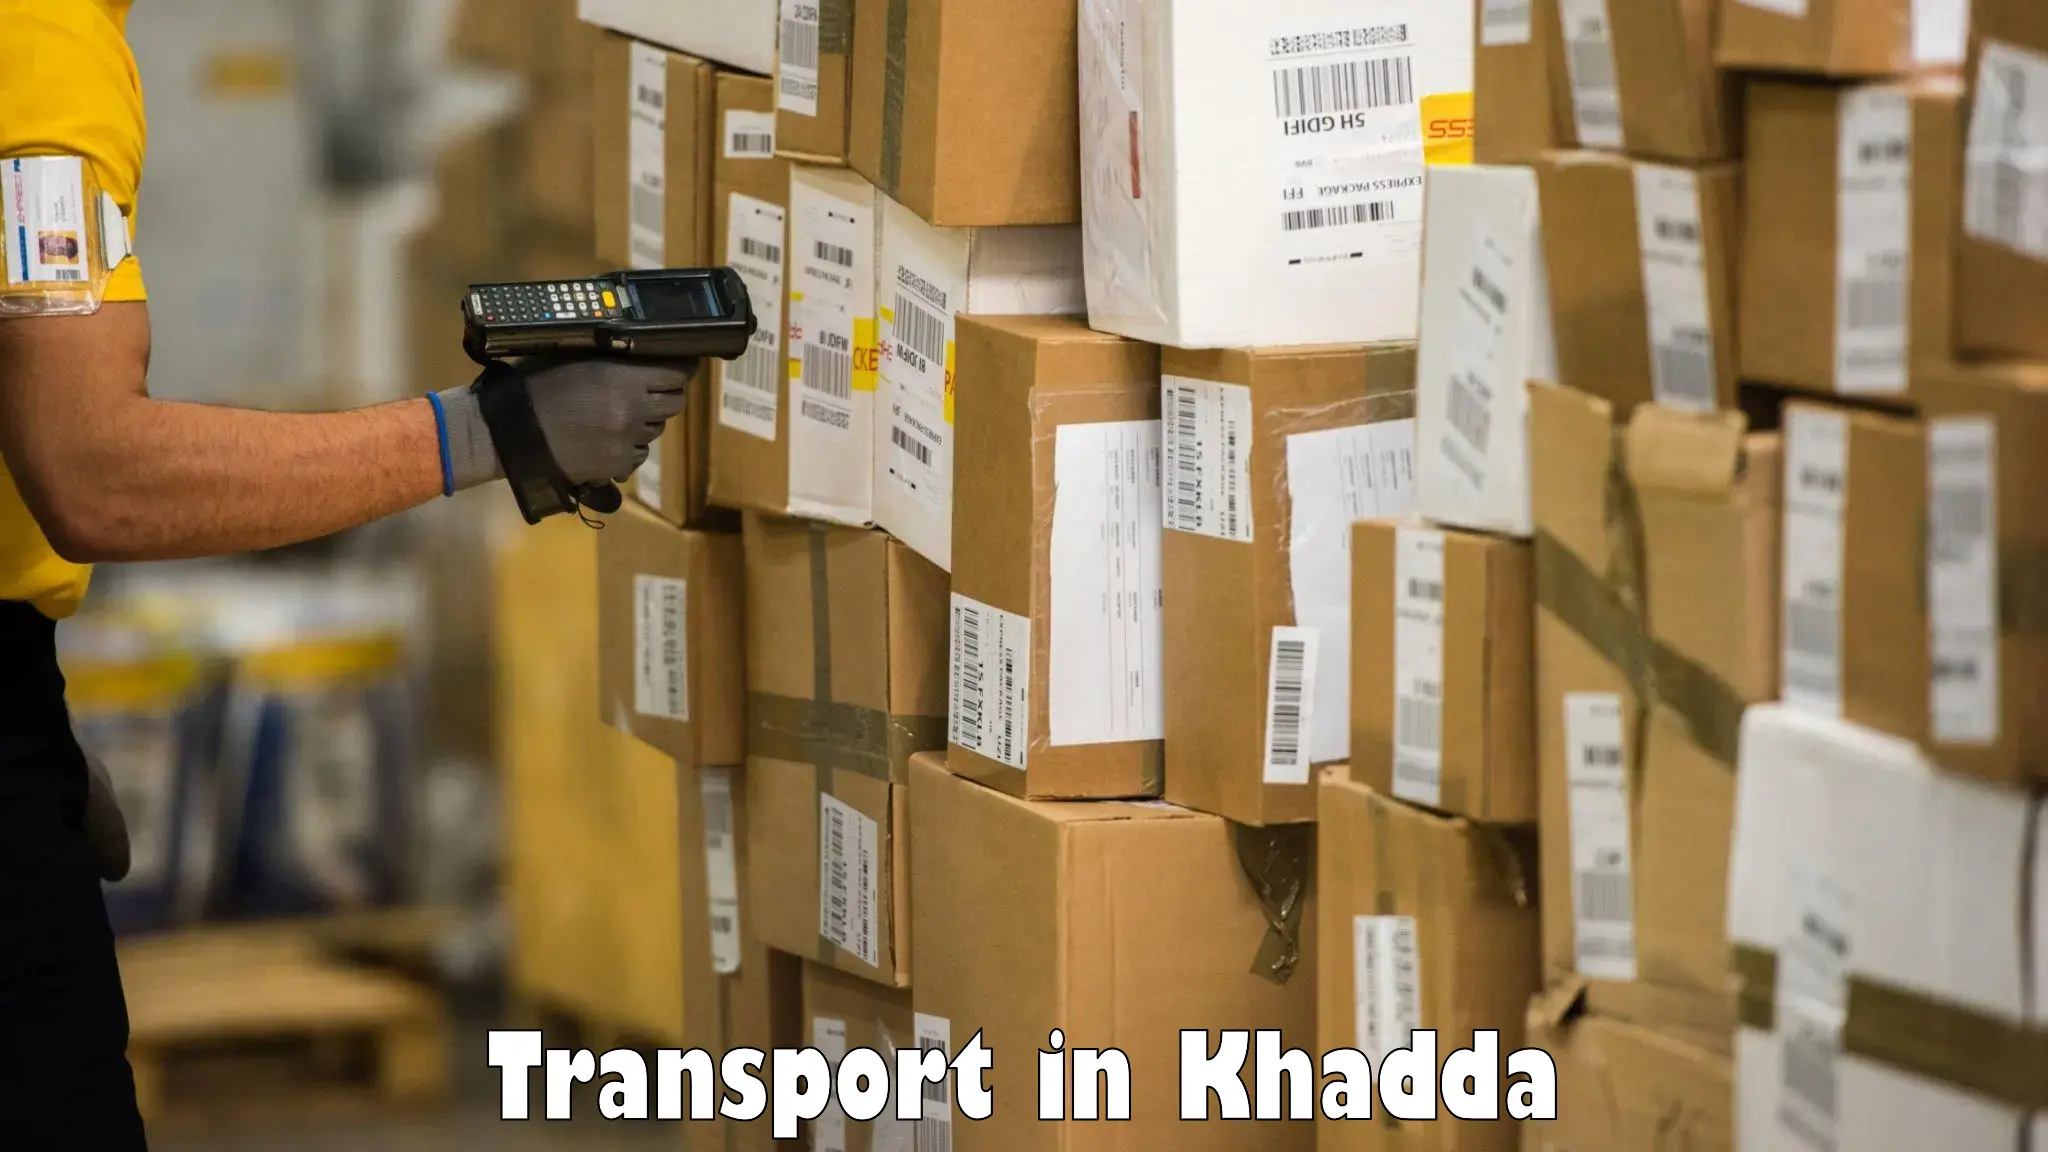 Nationwide transport services in Khadda